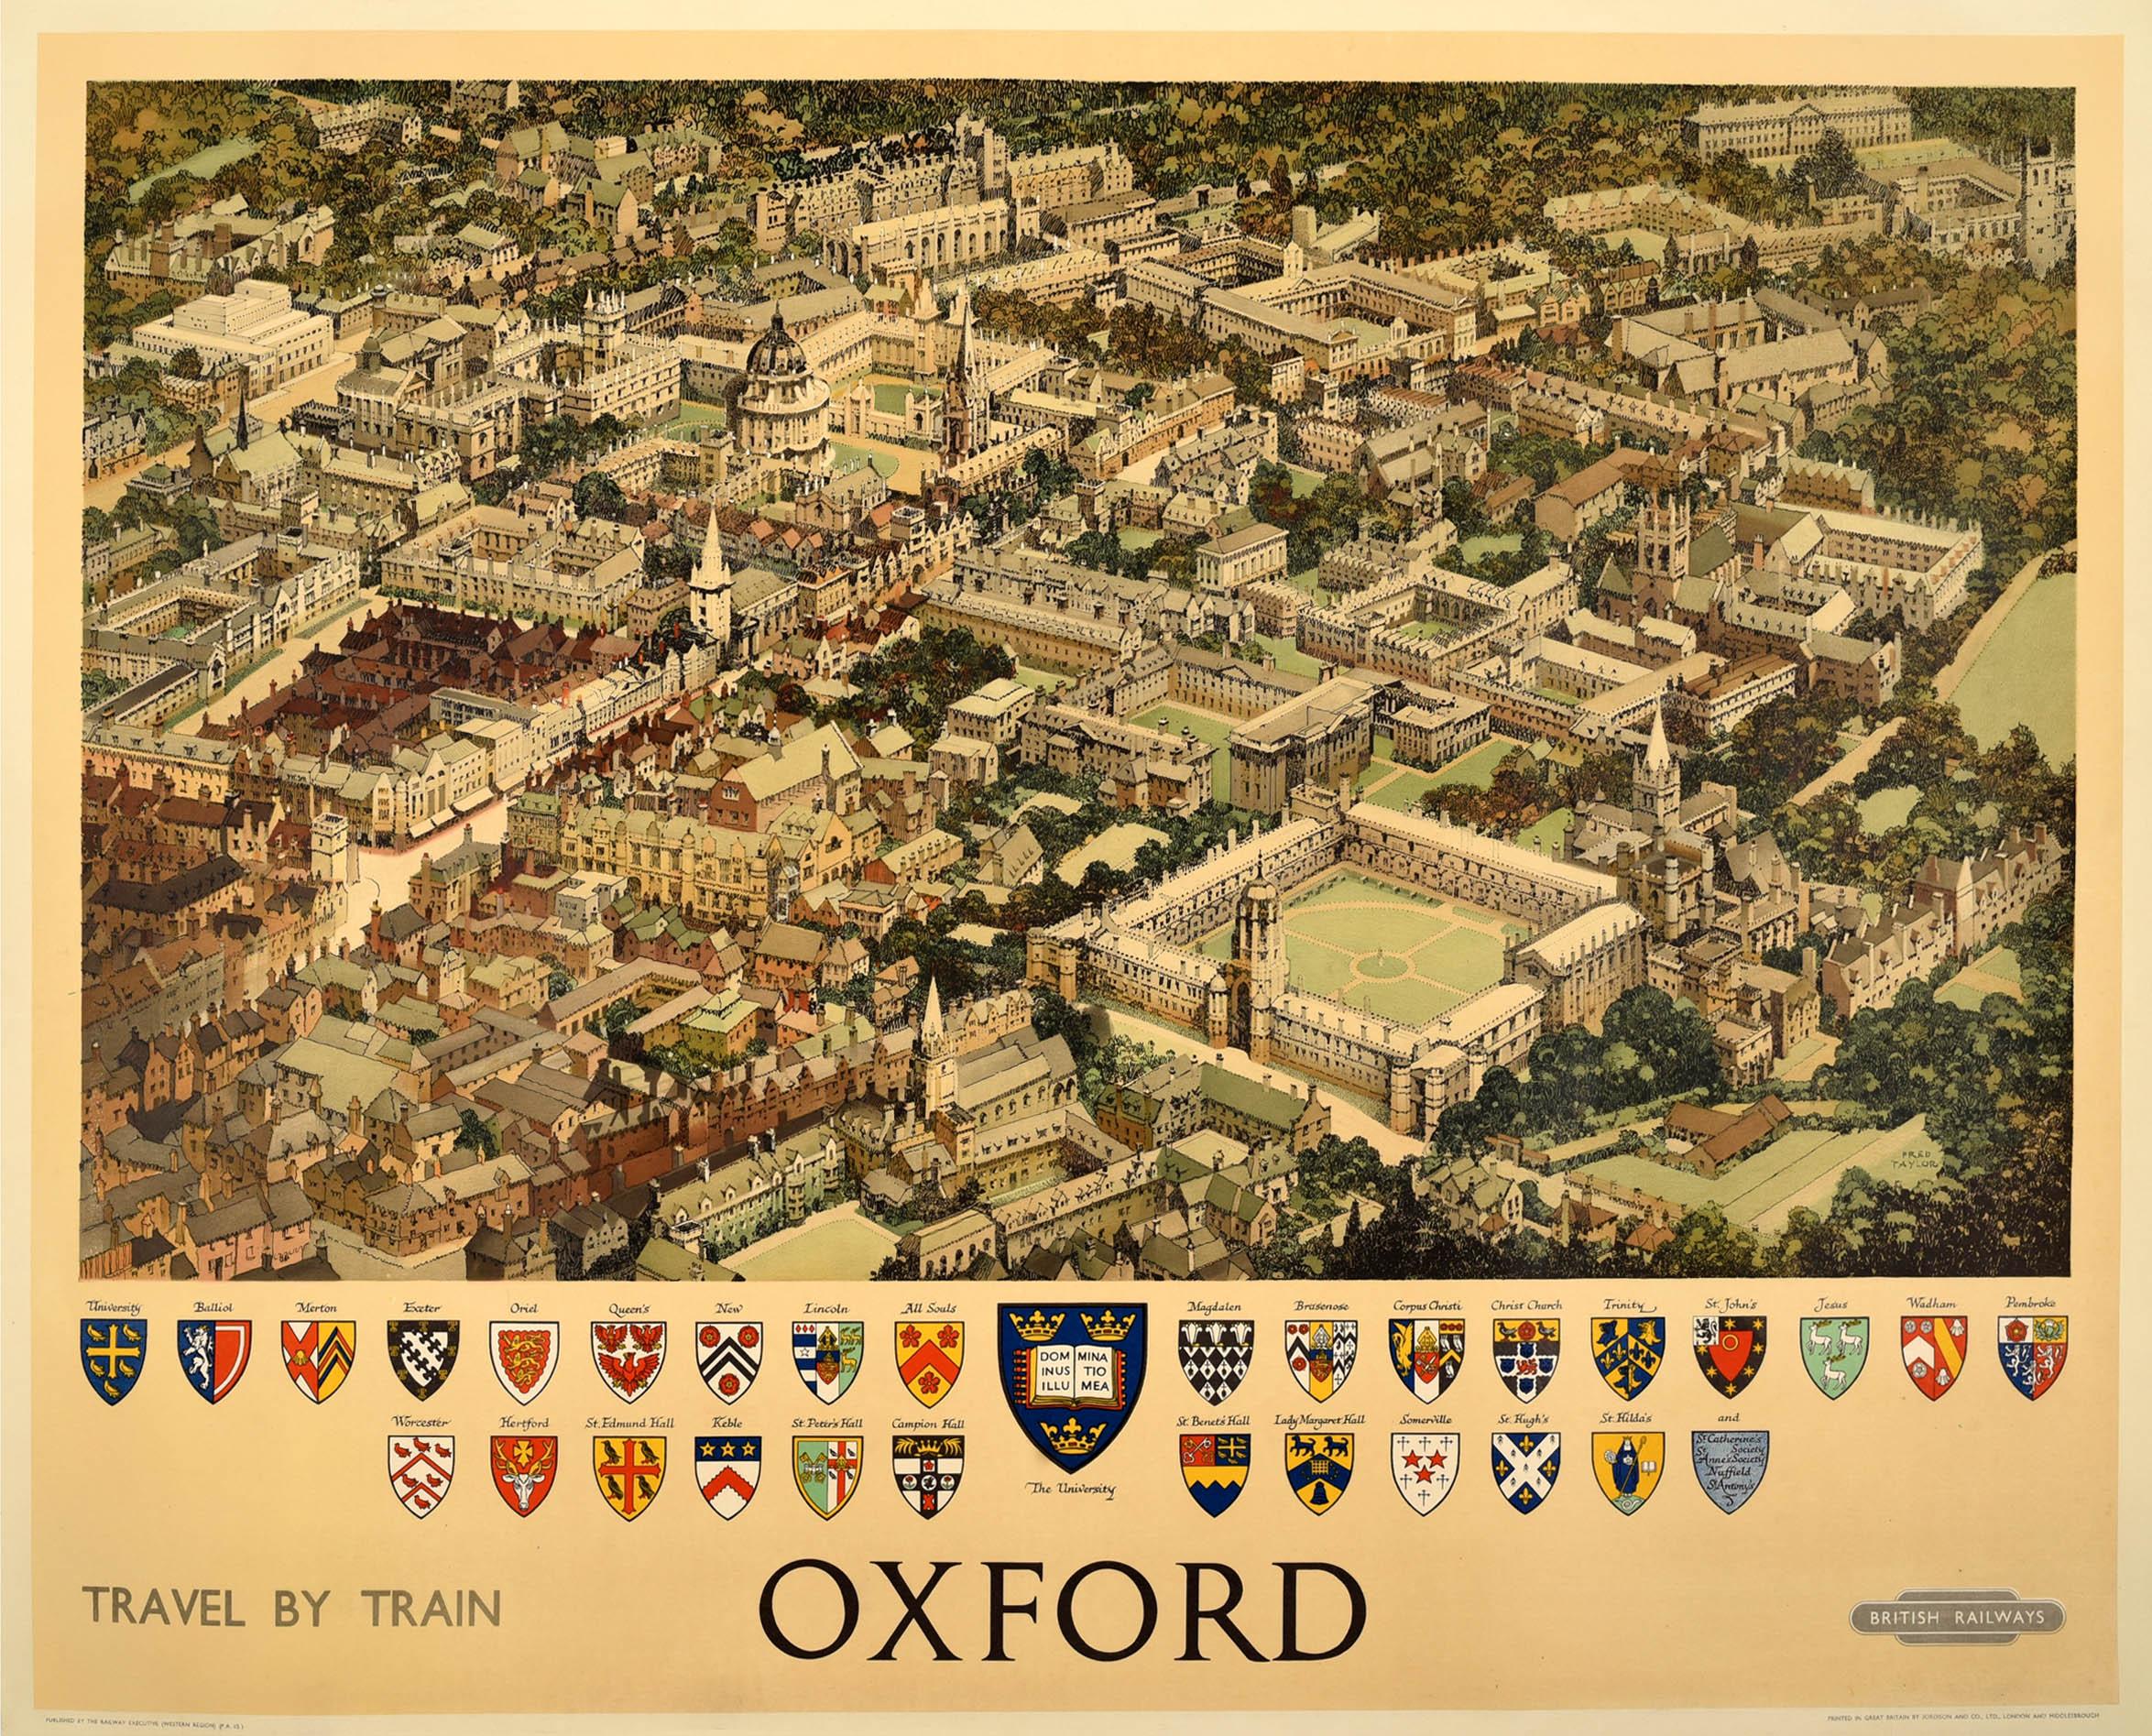 Original vintage railway poster published by British Railways - Oxford Travel by Train - featuring artwork by Fred Taylor (1875-1963) depicting an aerial map view of the city of Oxford including parks, the historic University of Oxford (founded